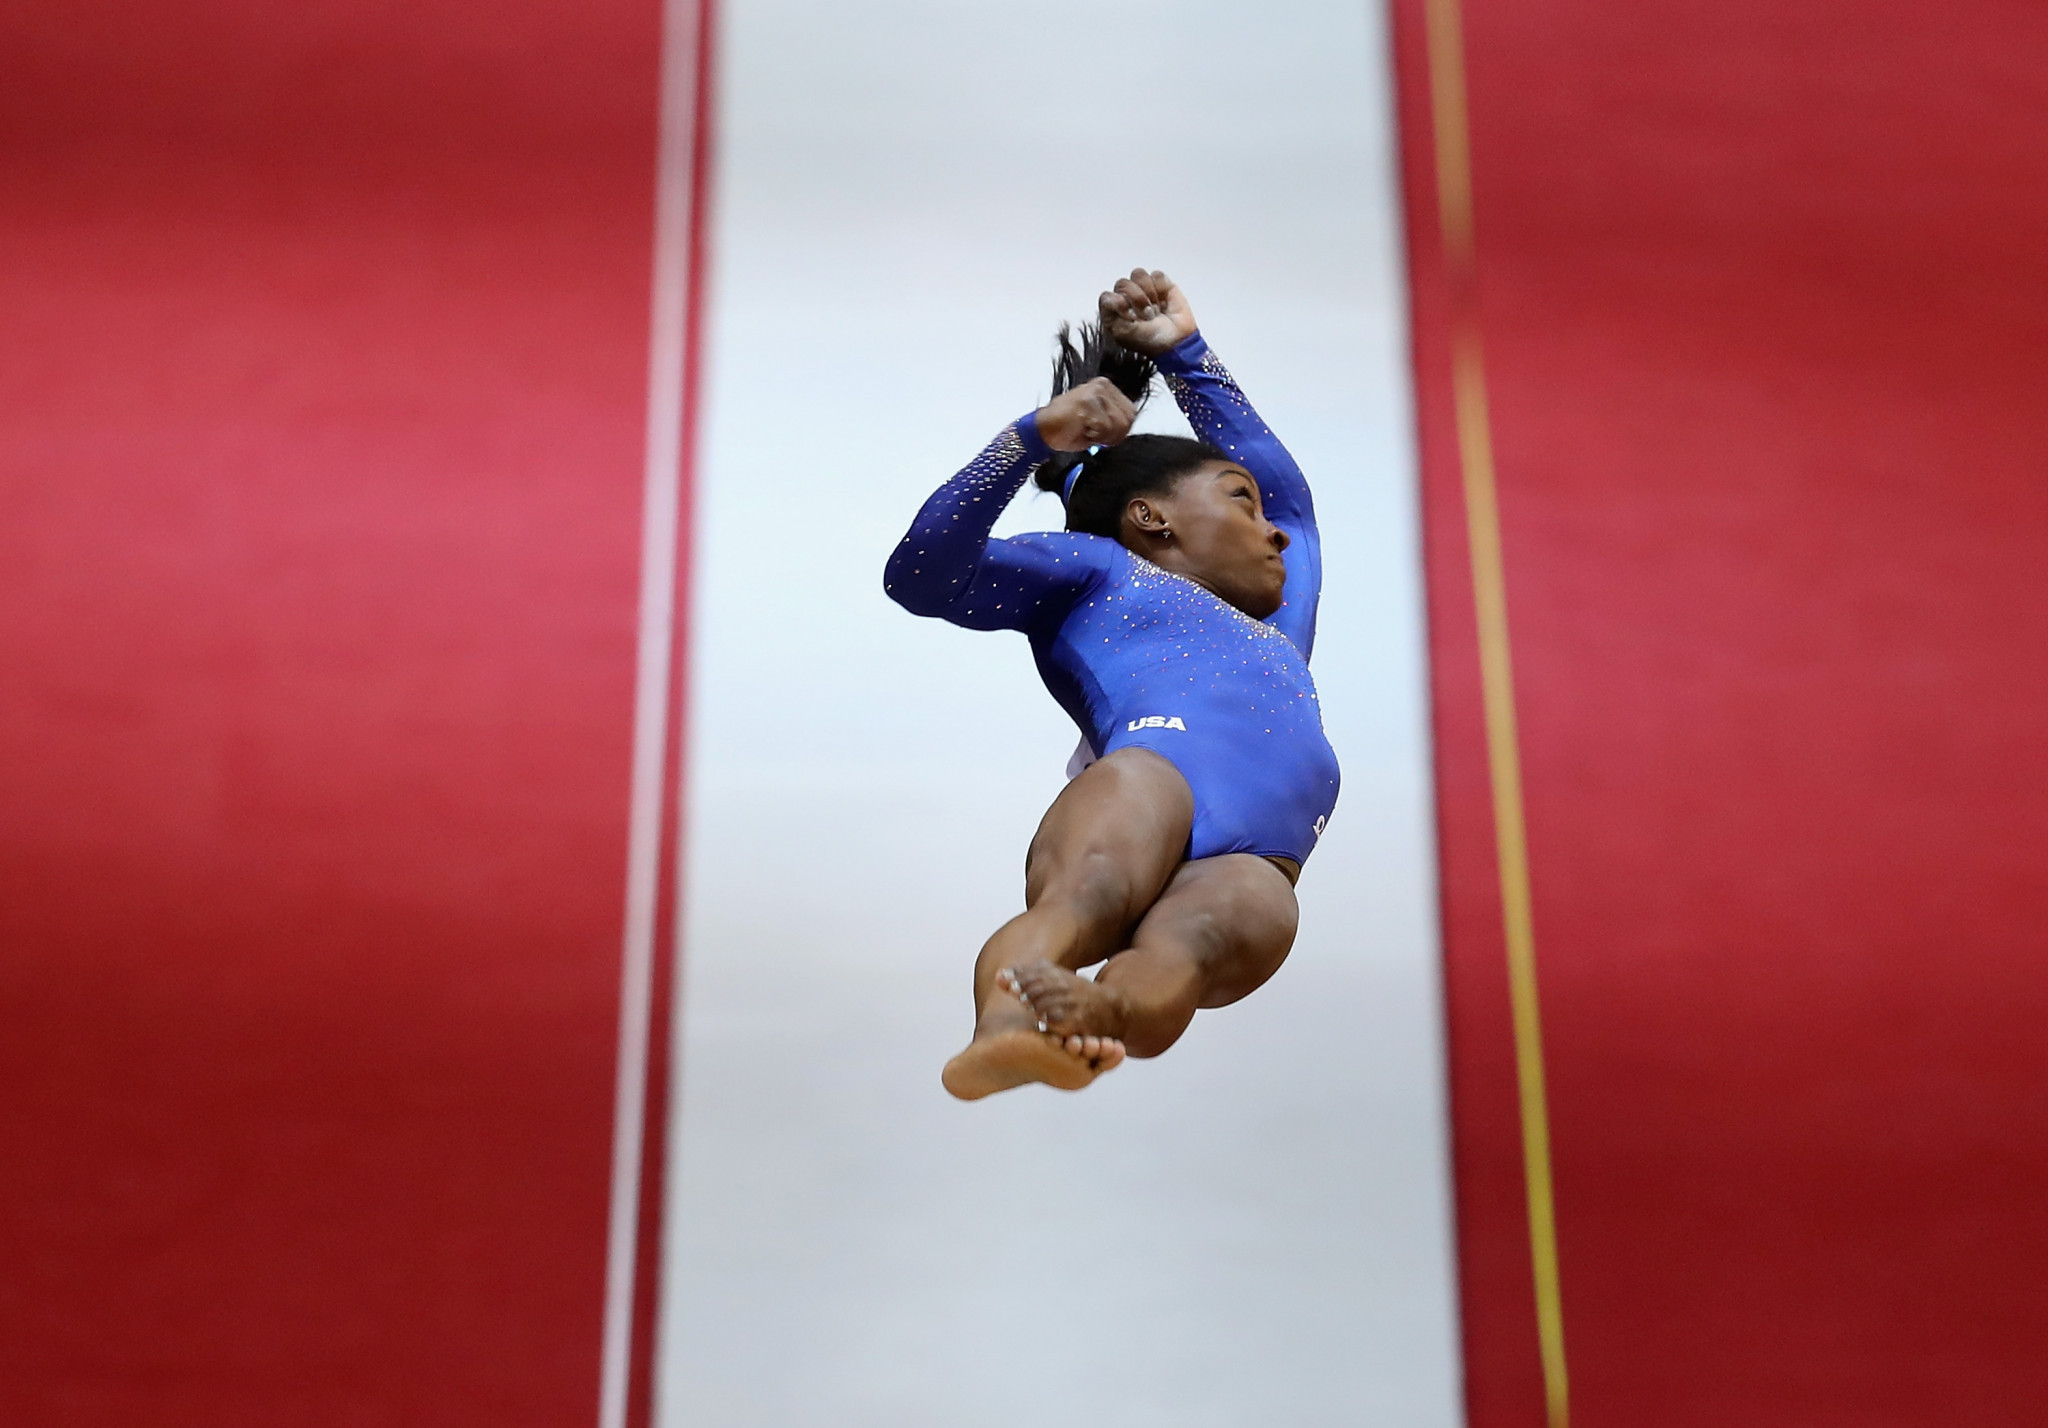 Simone Biles comfortably finished as the top qualifier for the women's individual all-around event ©Getty Images